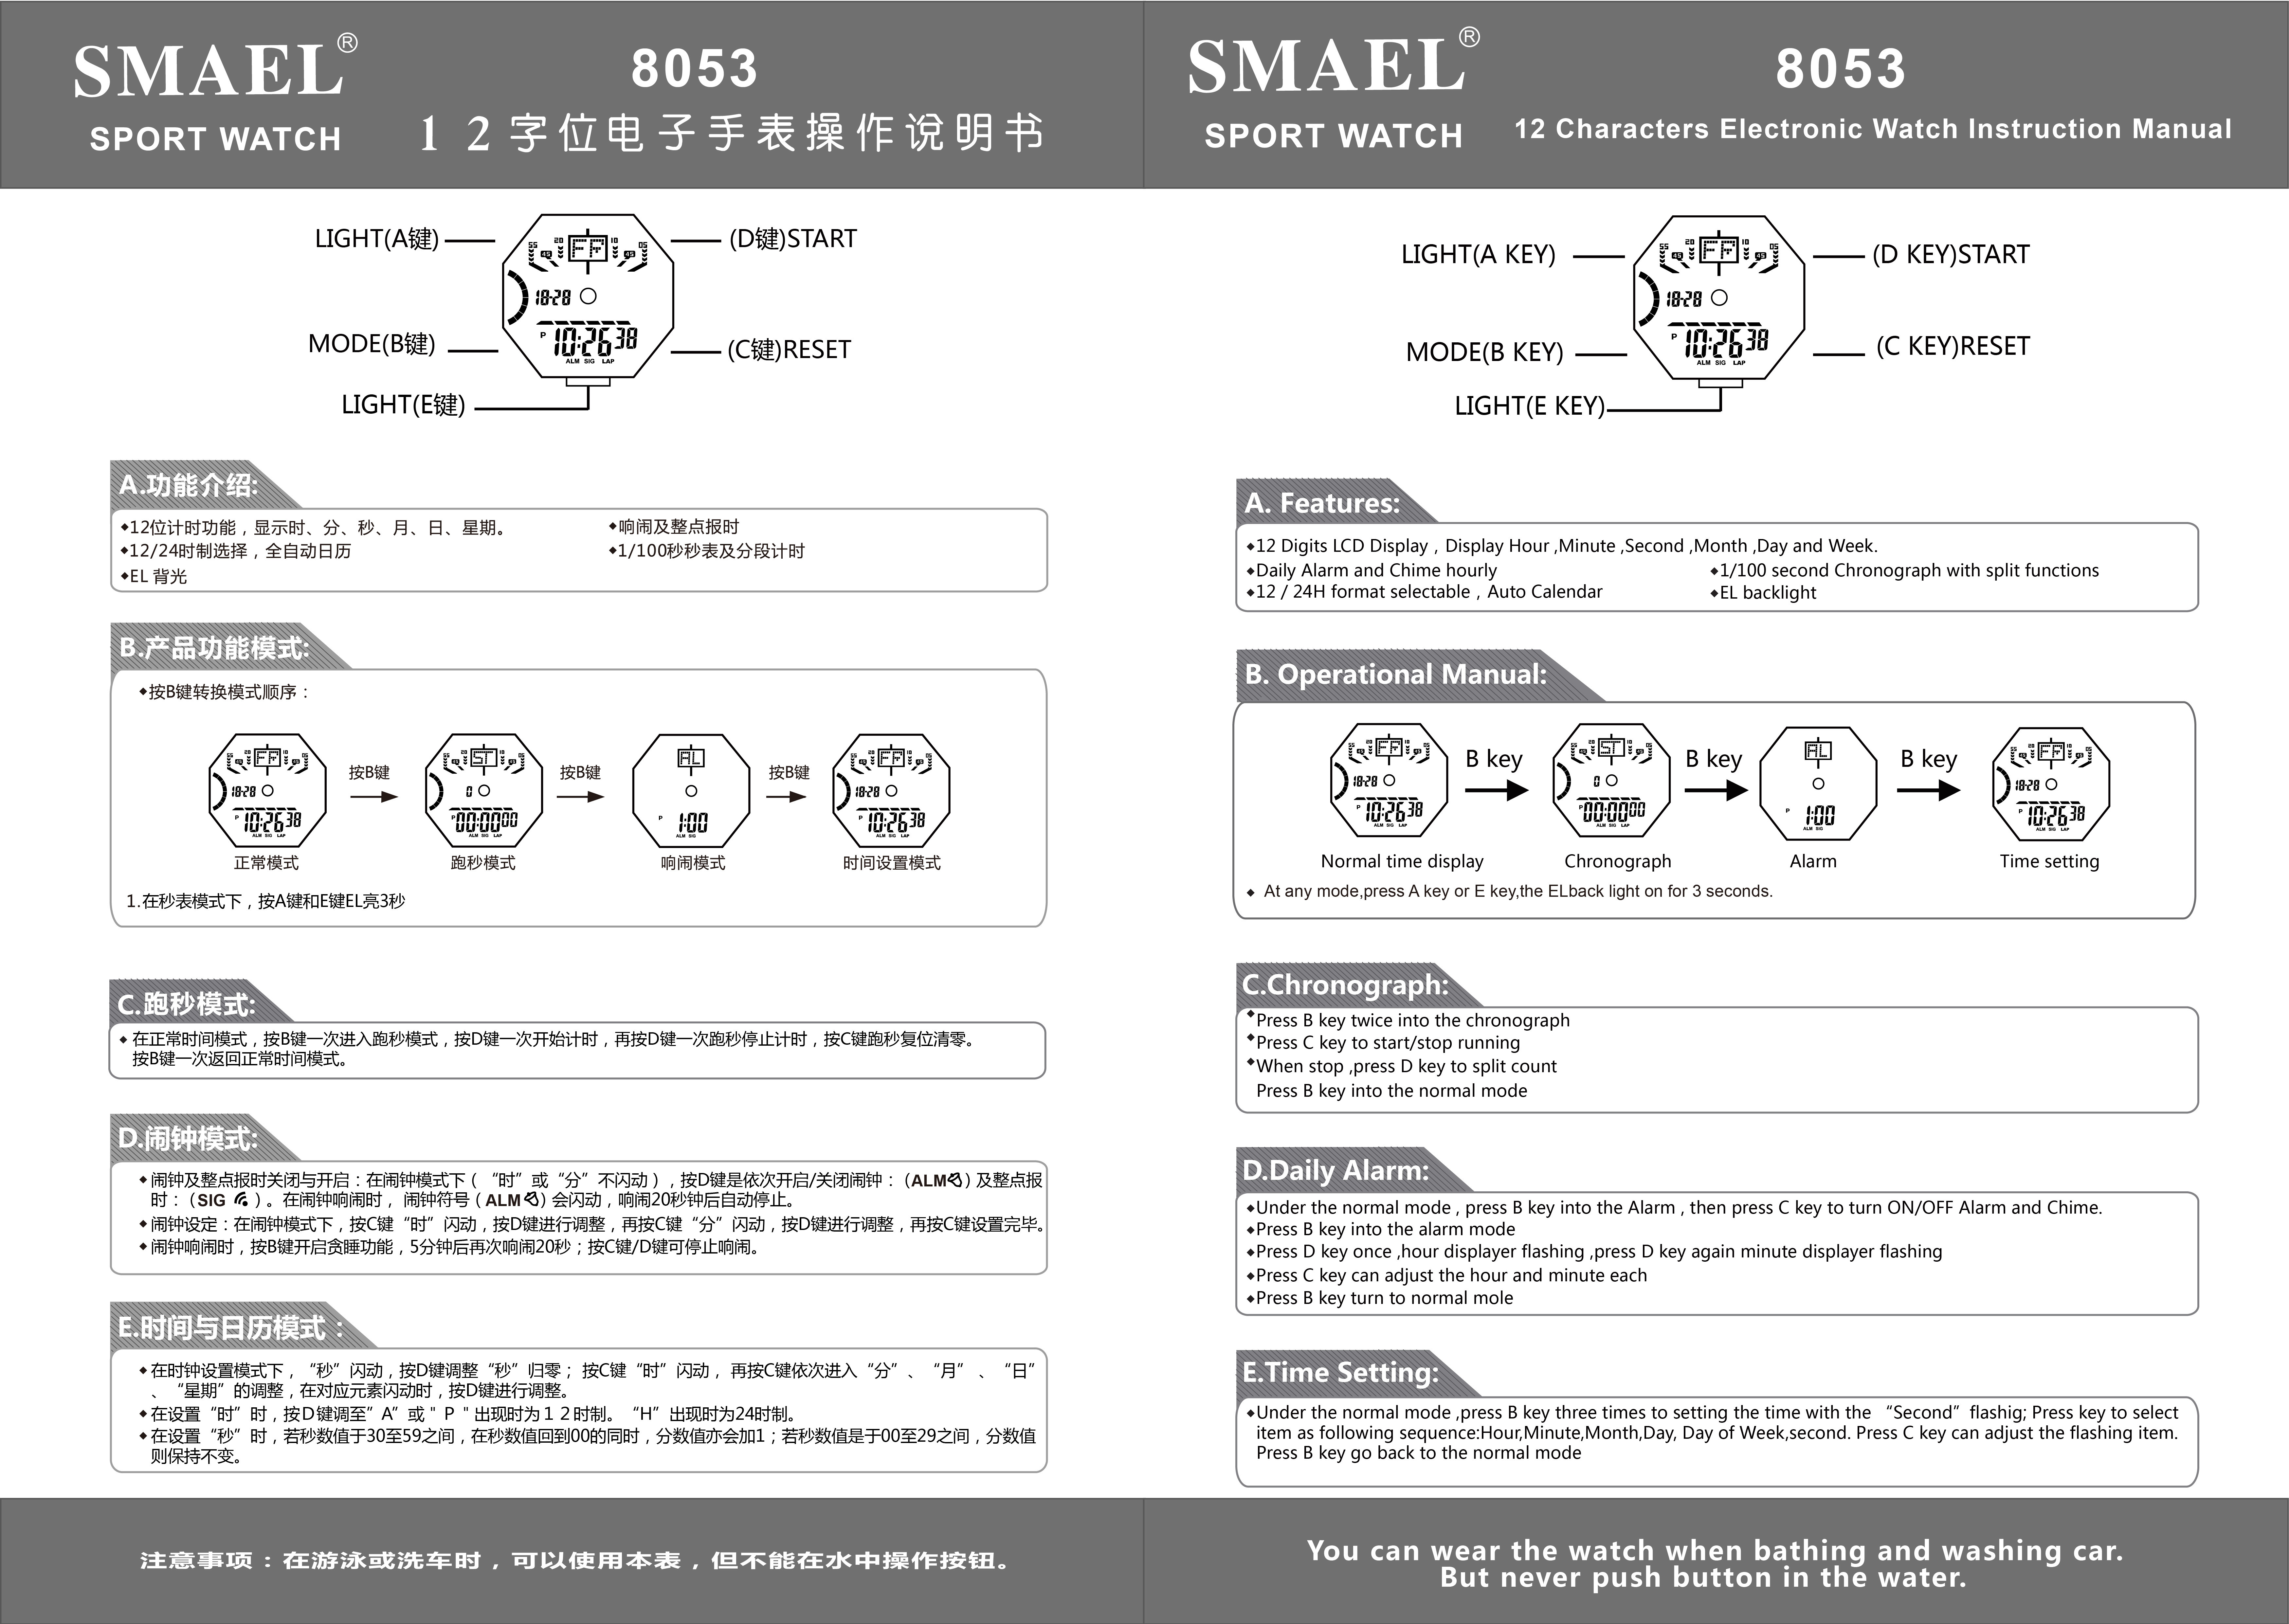 8053 instructions in English and Chinese 12